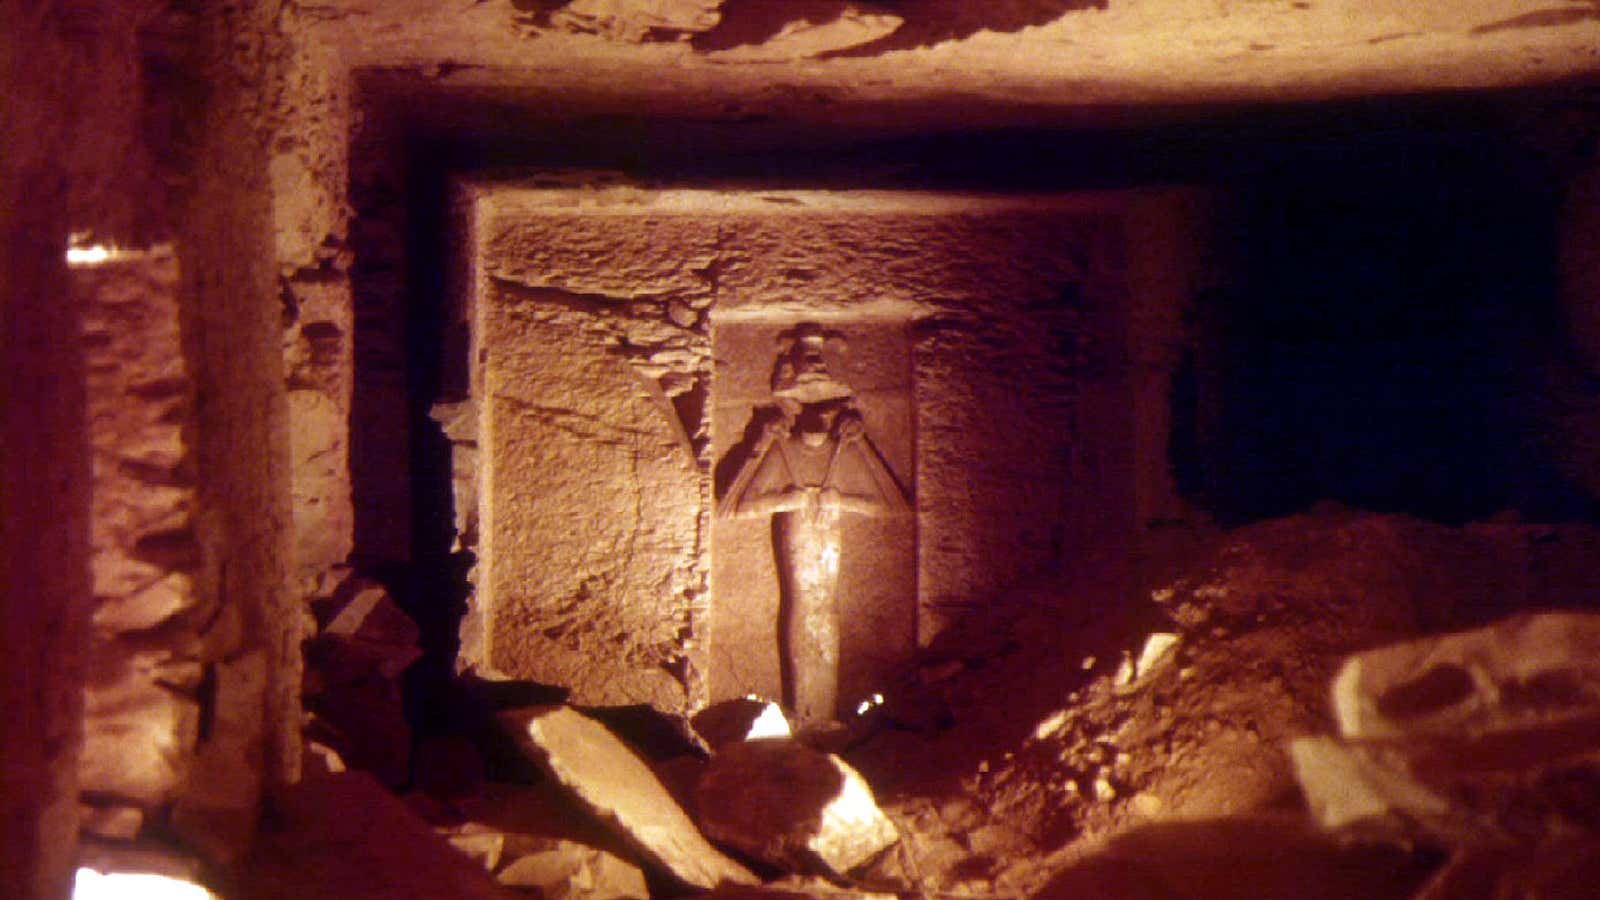 An undated rendering of Osiris in another tomb.